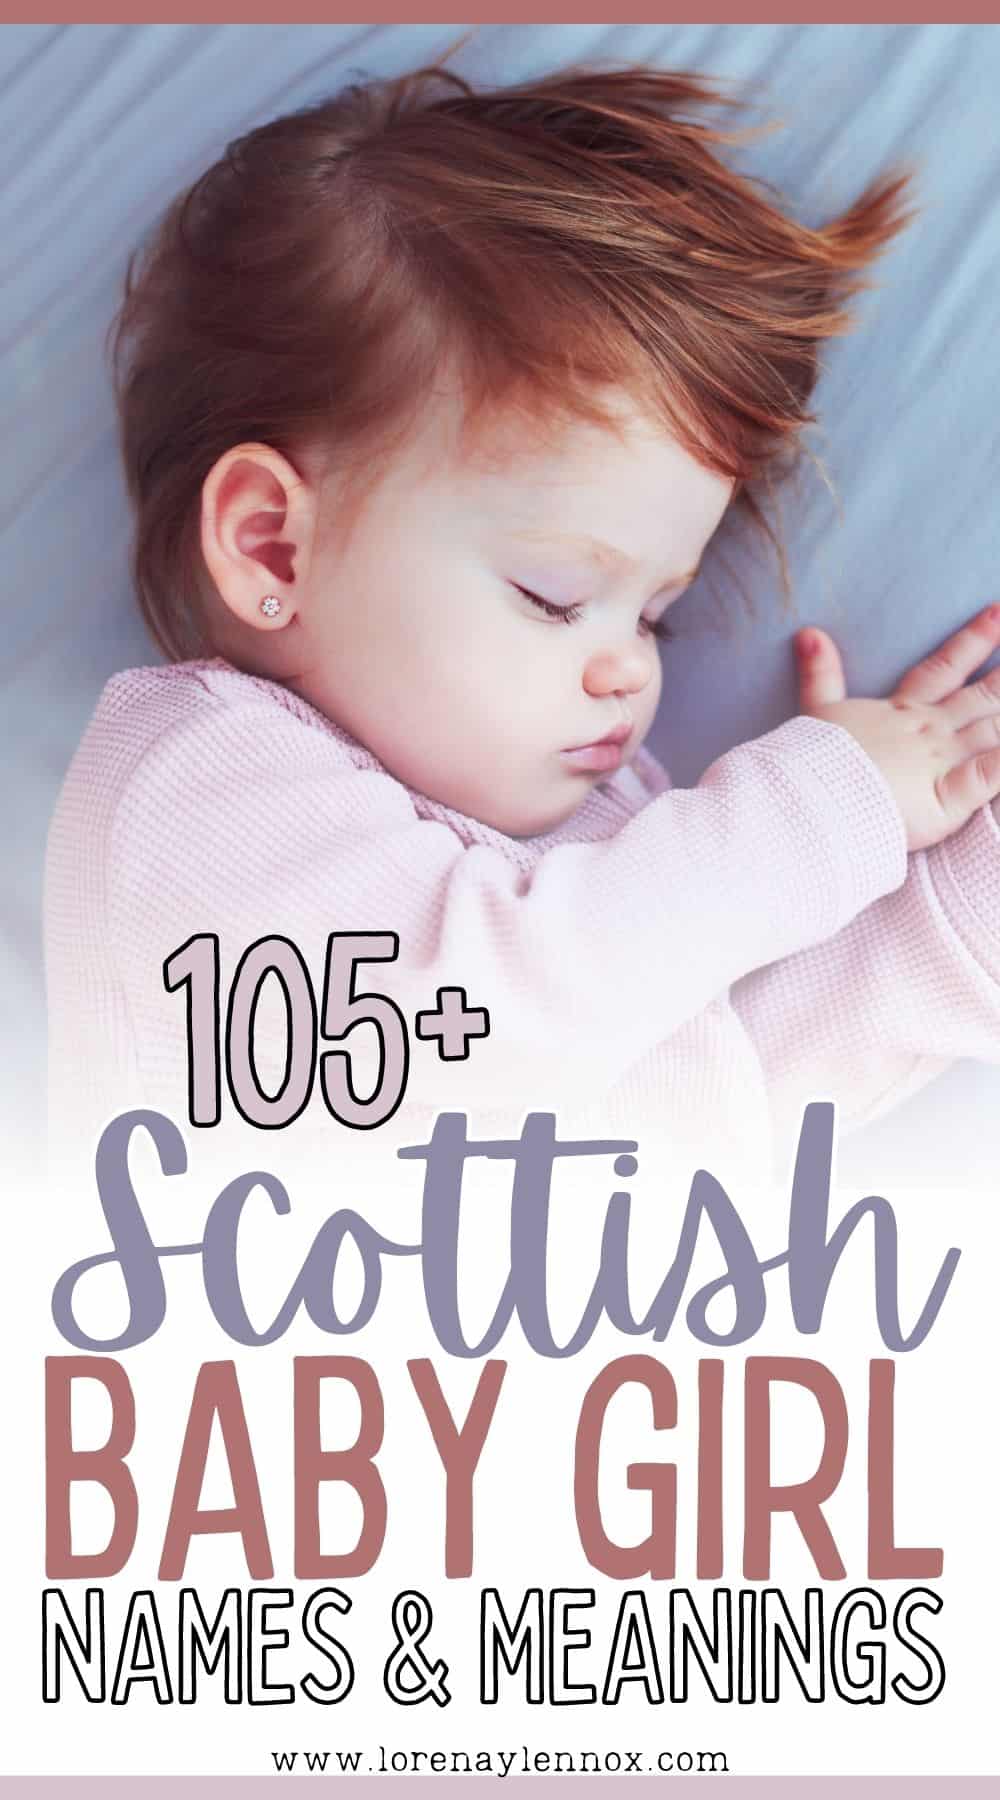 Embrace the ethereal charm of Scotland with these captivating baby girl names that evoke the beauty of misty lochs and ancient castles, reflecting the country's timeless allure. From traditional favorites to unique treasures, find the perfect Scottish name for your little princess.